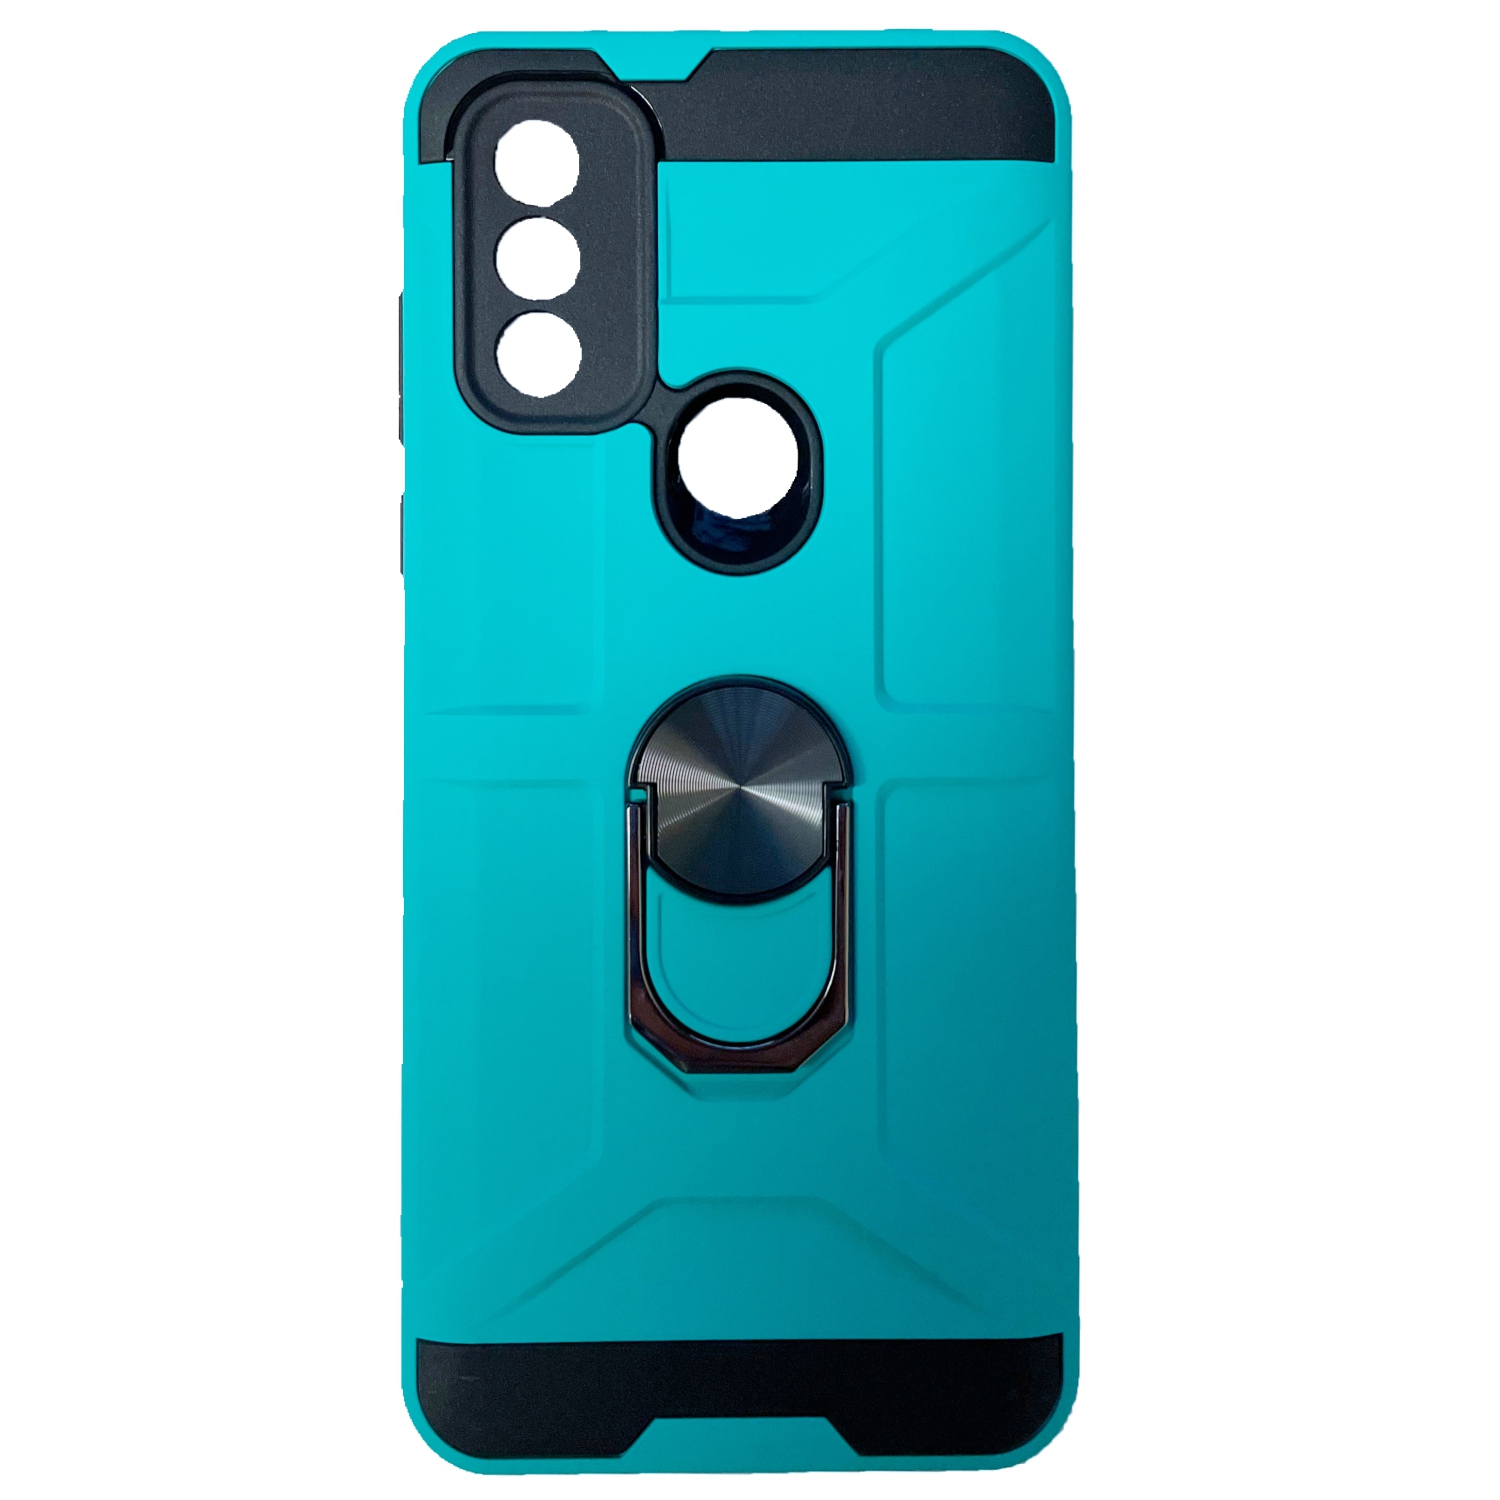 TopSave Dual Layer Hybrid Cover Case w/360 Degrees Rotating Ring Stand For Motorola Moto G Pure 6.5", Teal